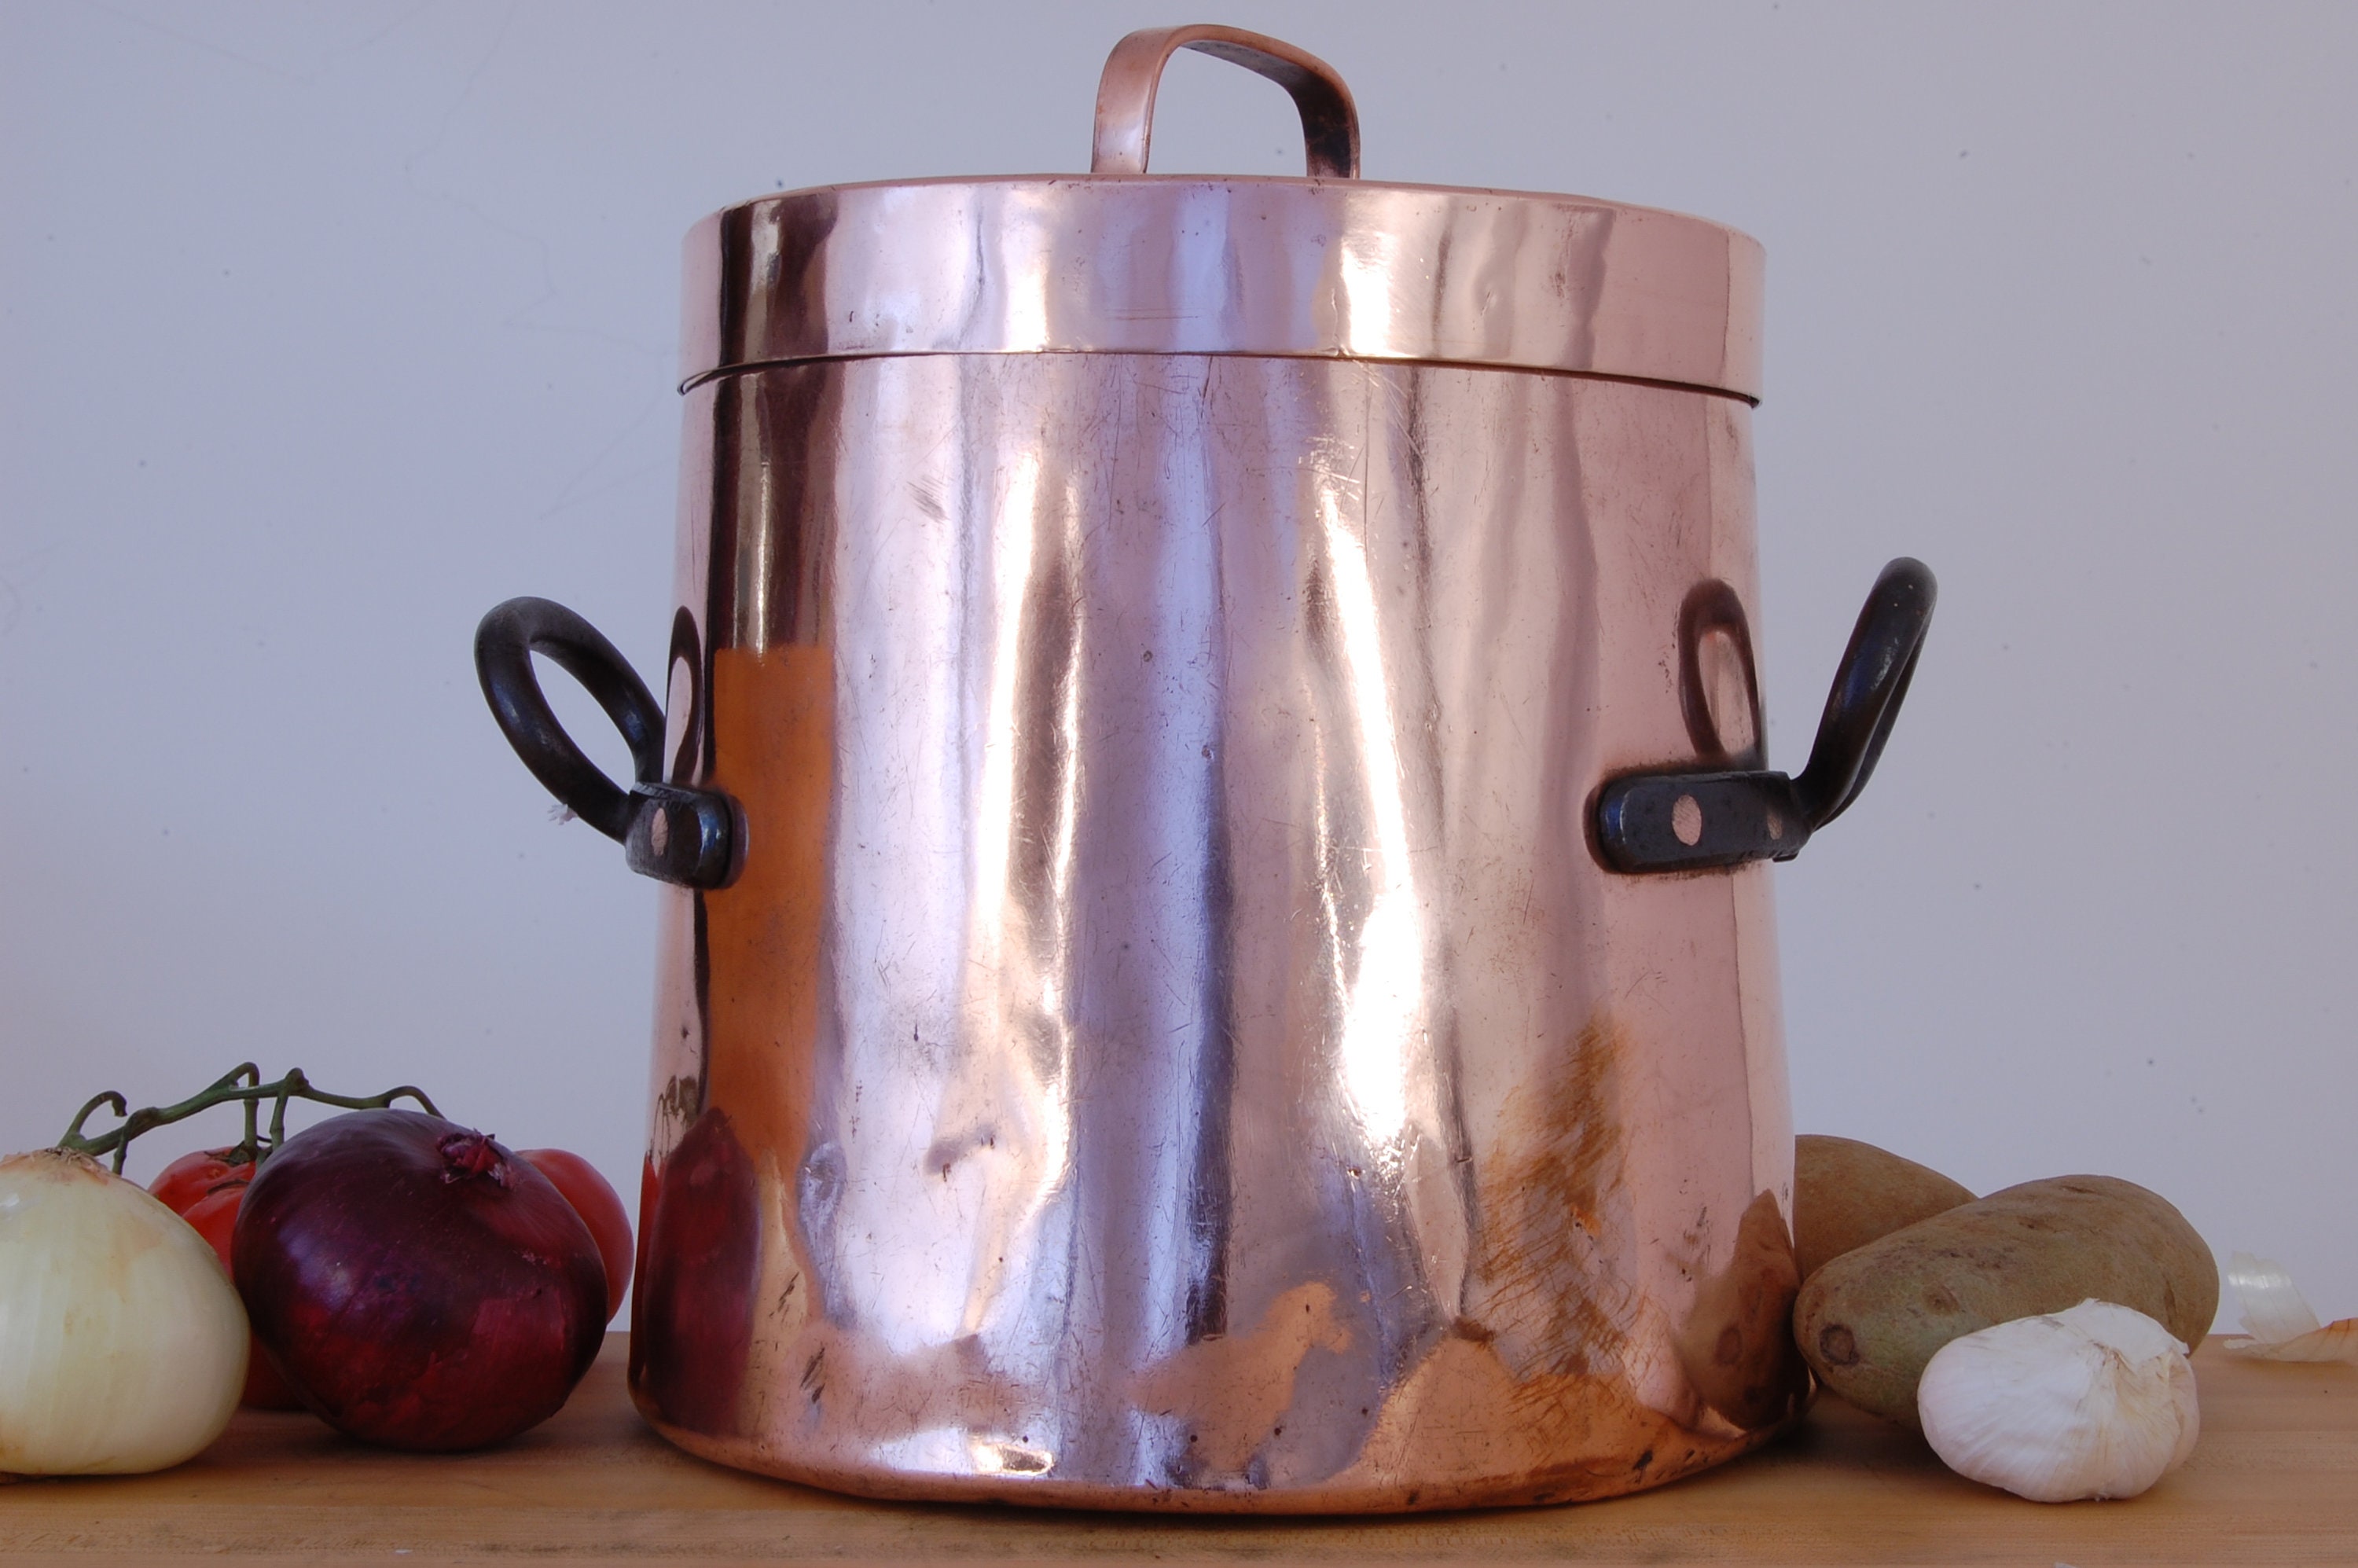 NEW TIN Stock Pot 8lb 12oz. French Cookware. Dovetailed. Beautiful Hand  Hammered Hand Made Pan. 1800s. Vintage Antique Copper Pot.